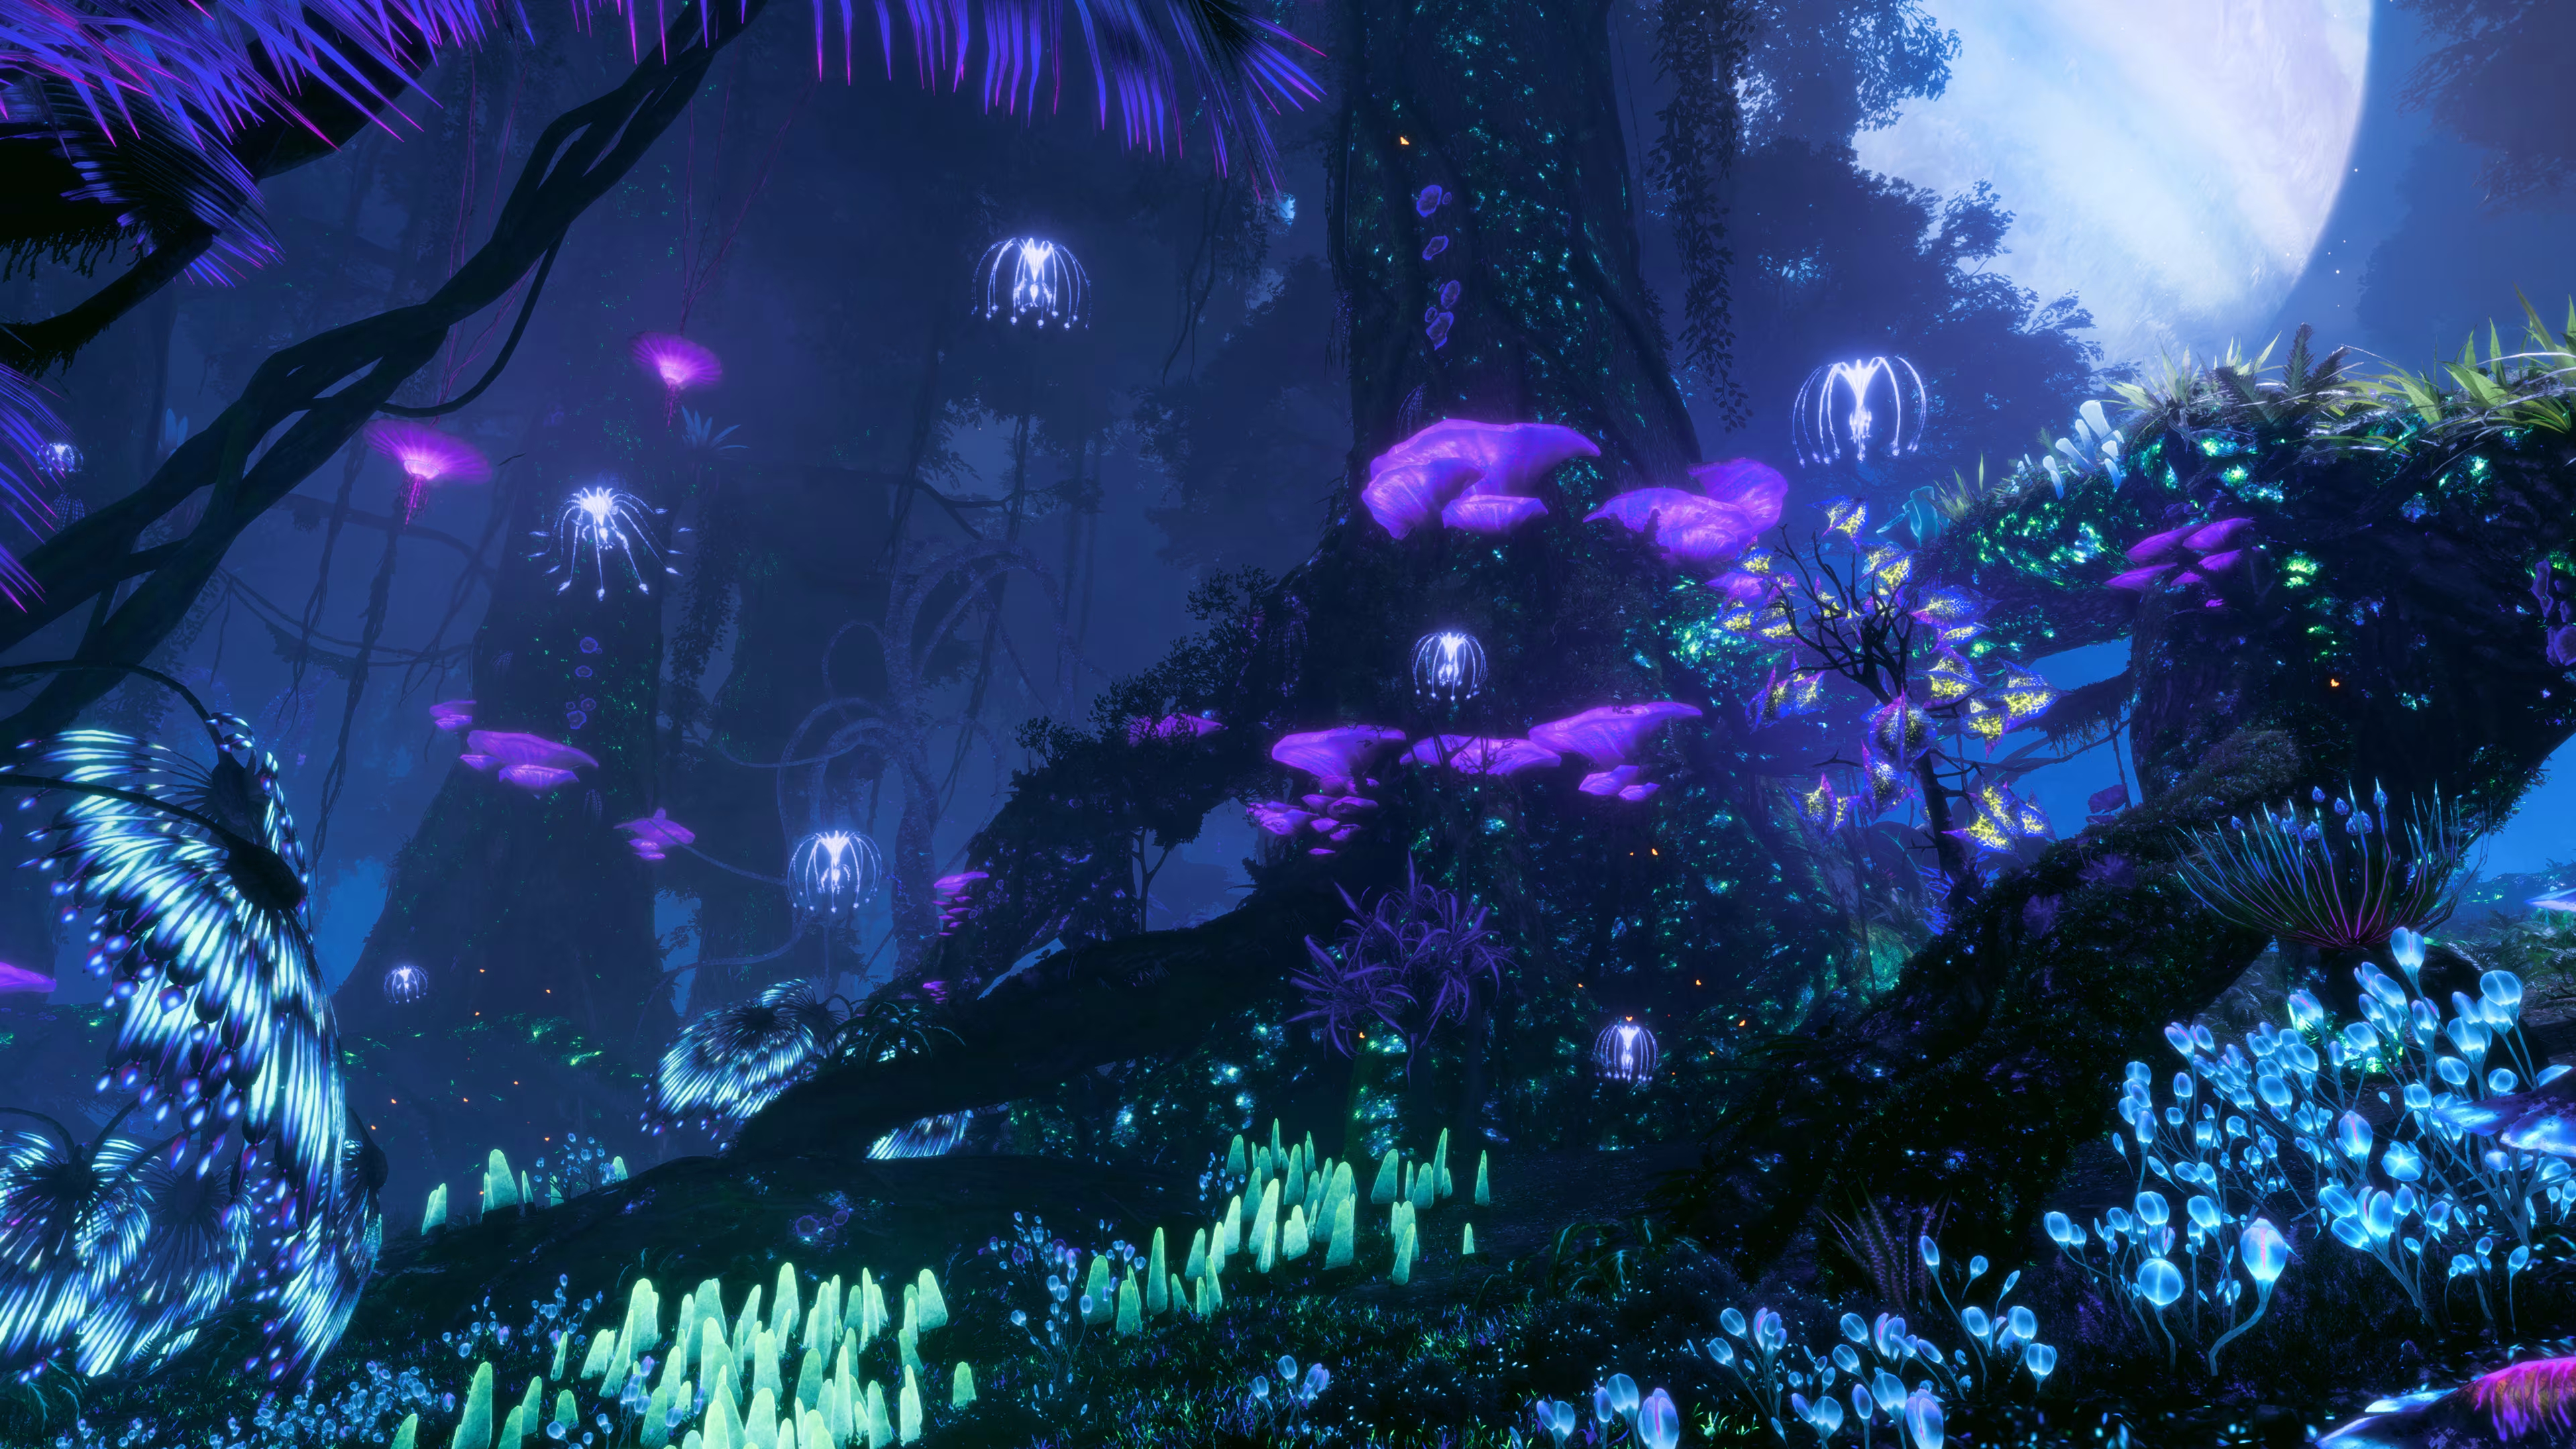 Avatar Movie Exotic Nature Glowing Plants Turquoise Blue Neon Trees James Cameron 3840x2160